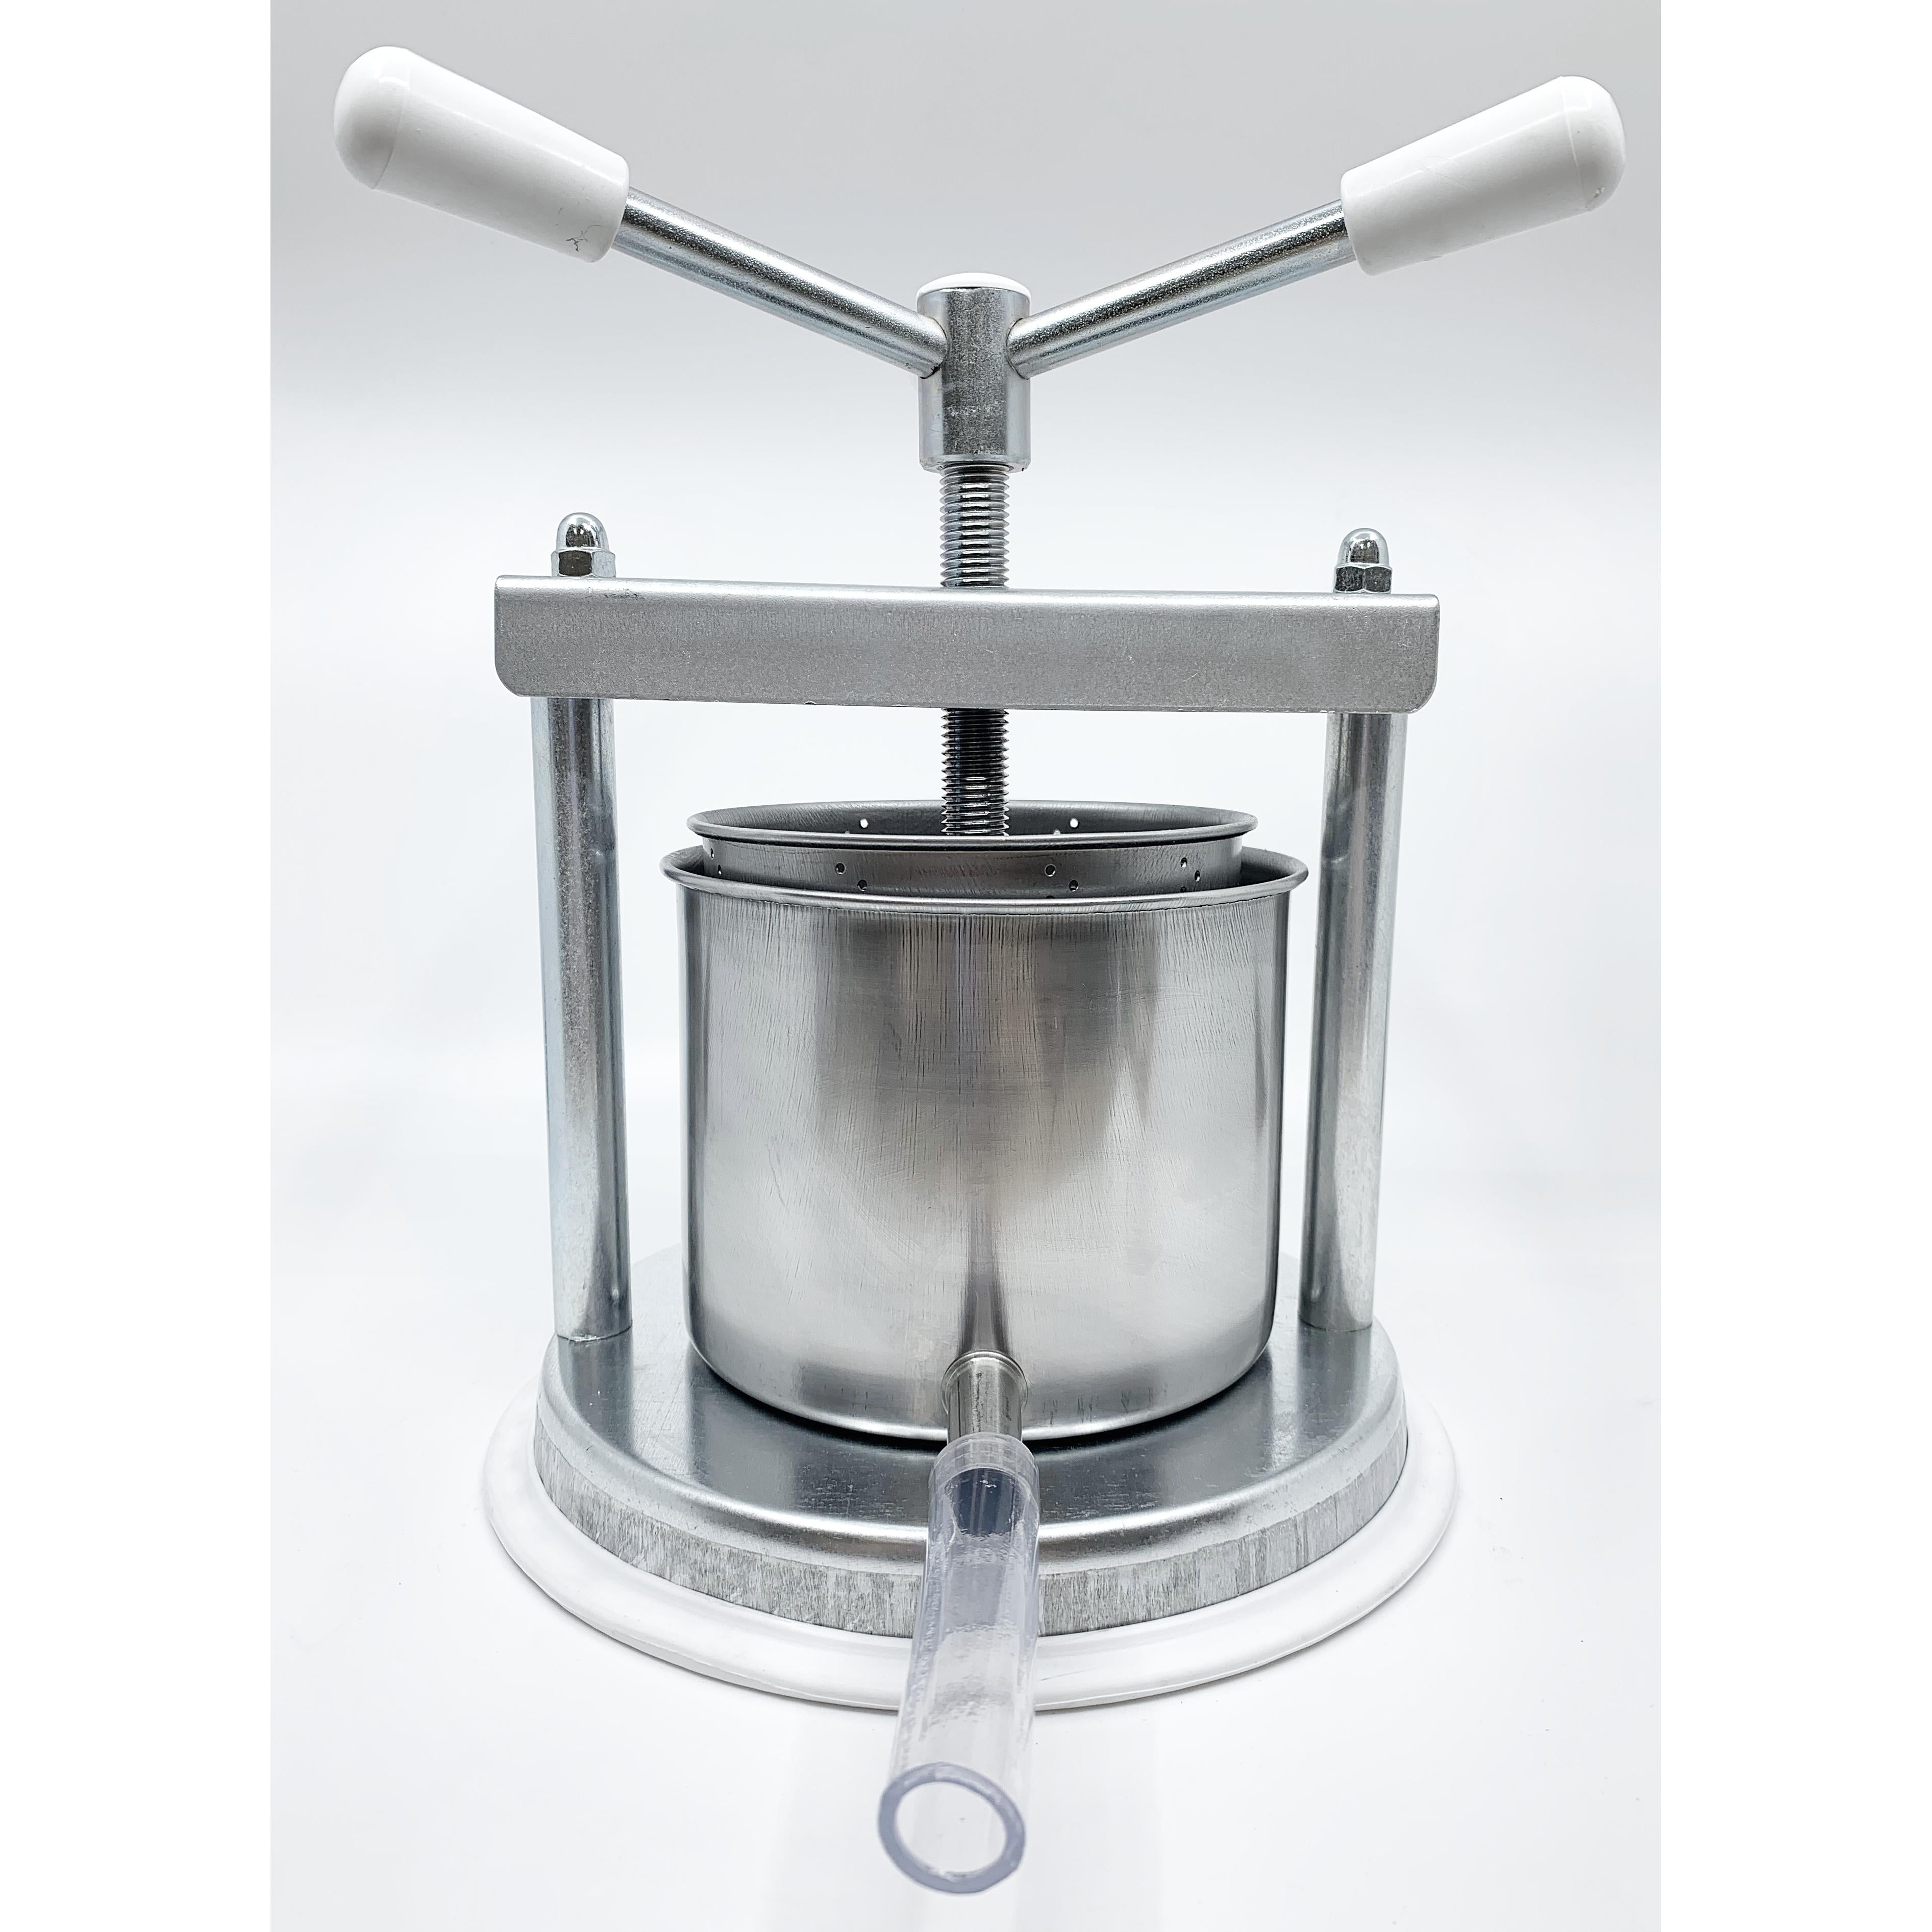 Small Professional Galvanized Vegetable / Fruit Press 5" - 2 Litre Torchietto Made in Italy for Pressing Fruits, Vegetables, Berries and Tinctures With Spout